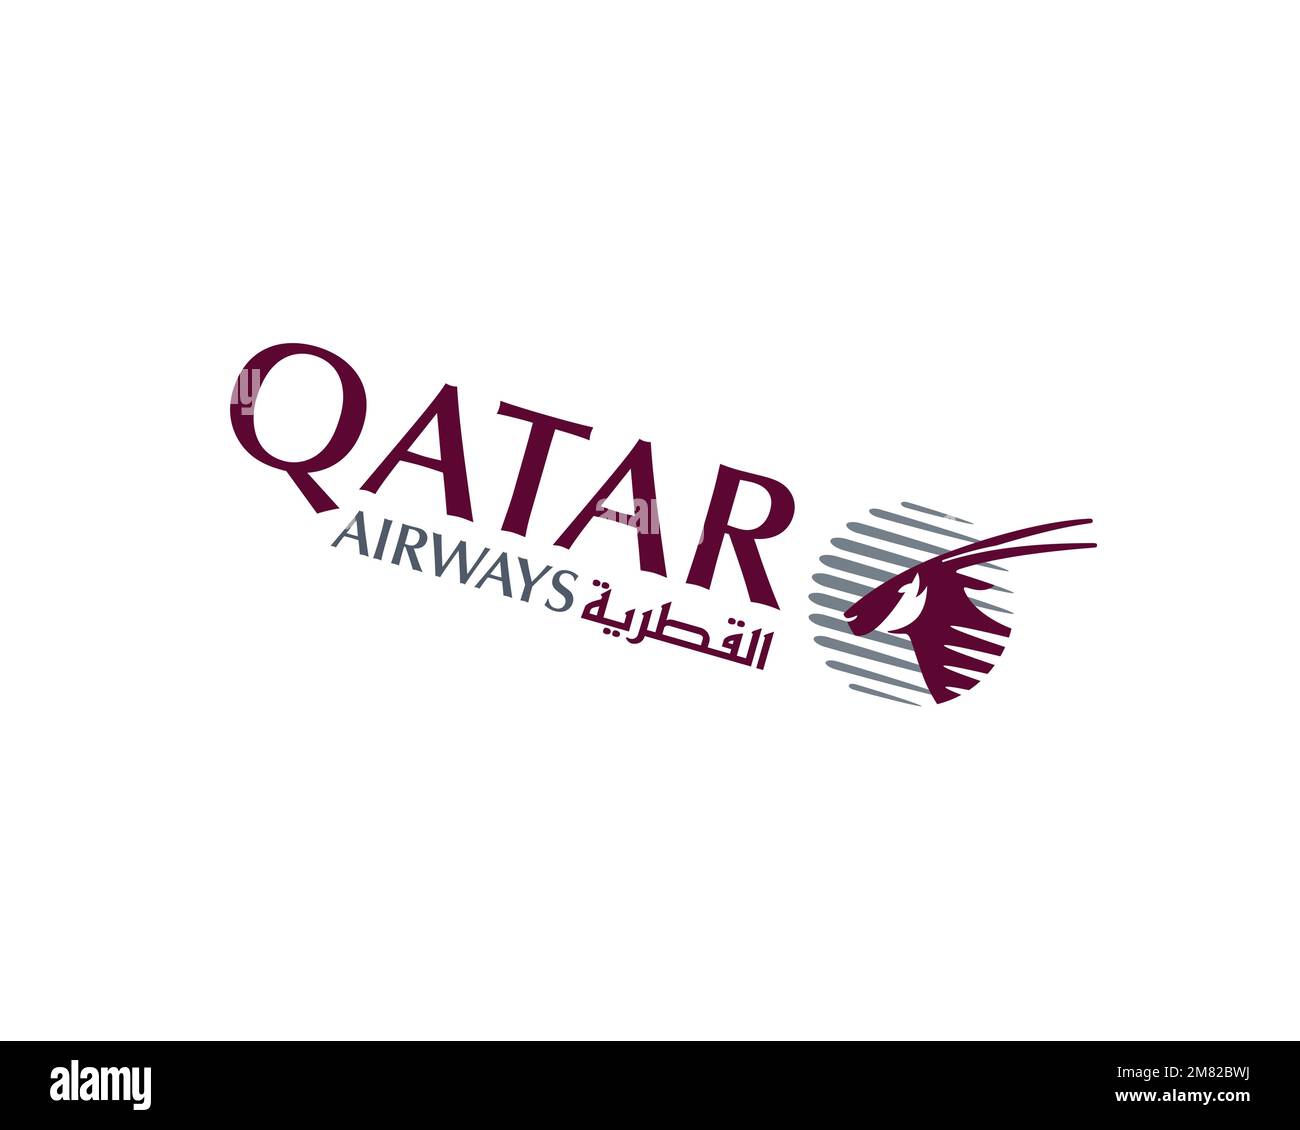 Qatar airways Cut Out Stock Images & Pictures - Alamy